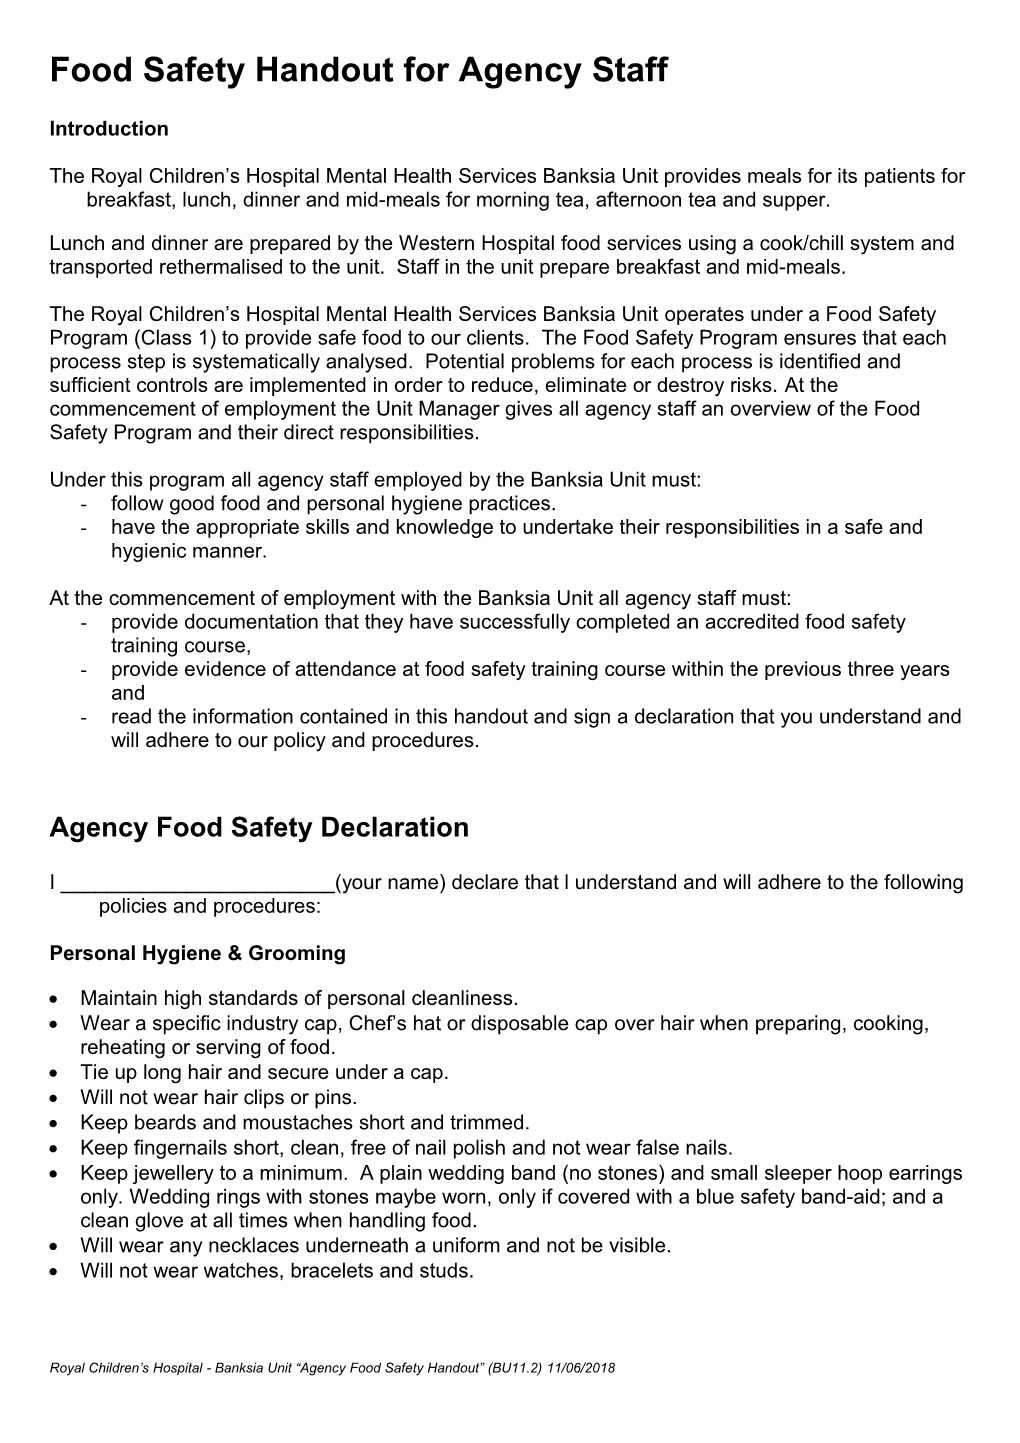 Food Safety Handout for Agency Staff